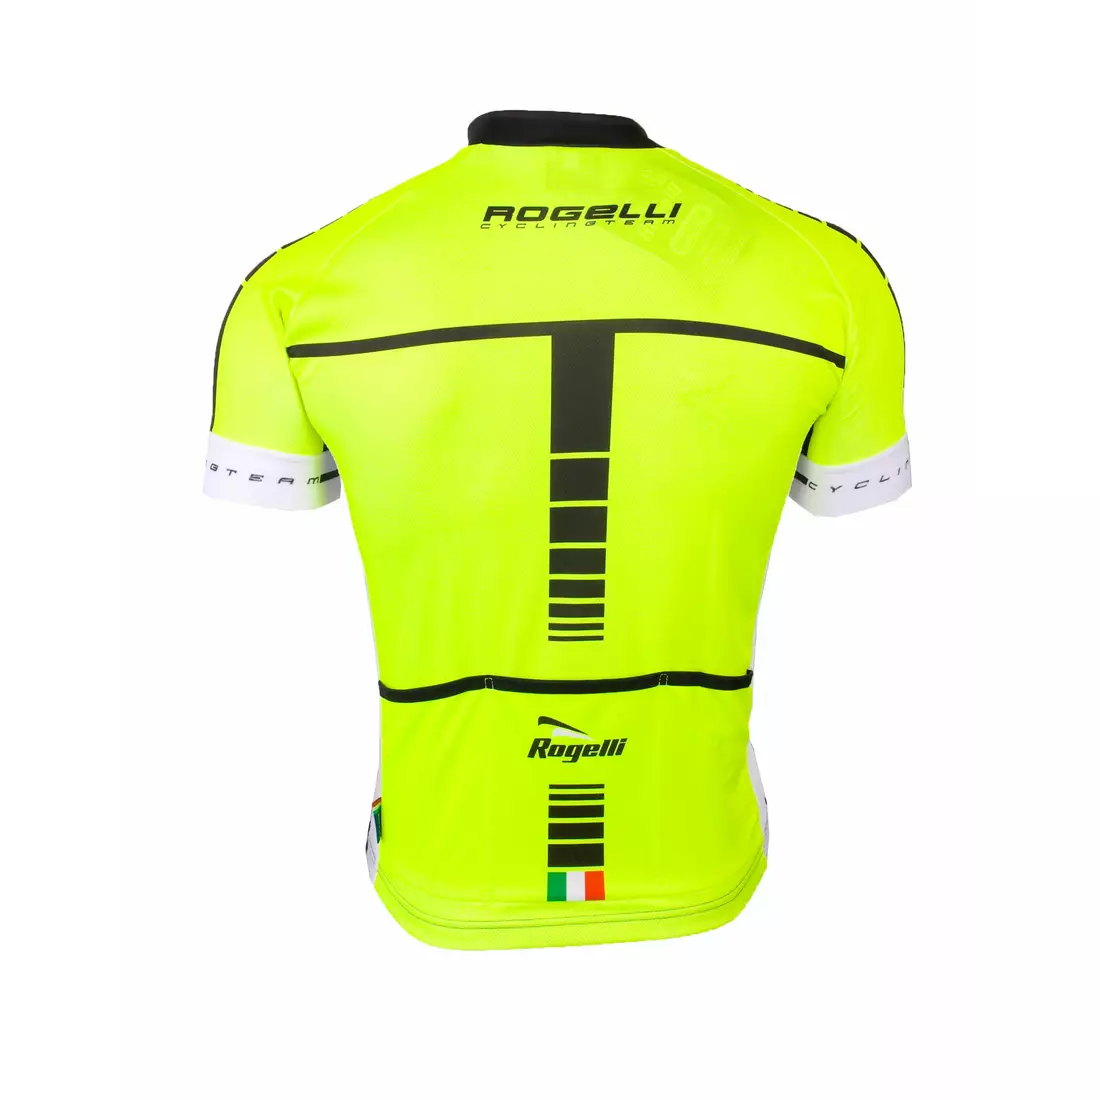 ROGELLI UMBRIA men's cycling jersey, 001.231, Fluor